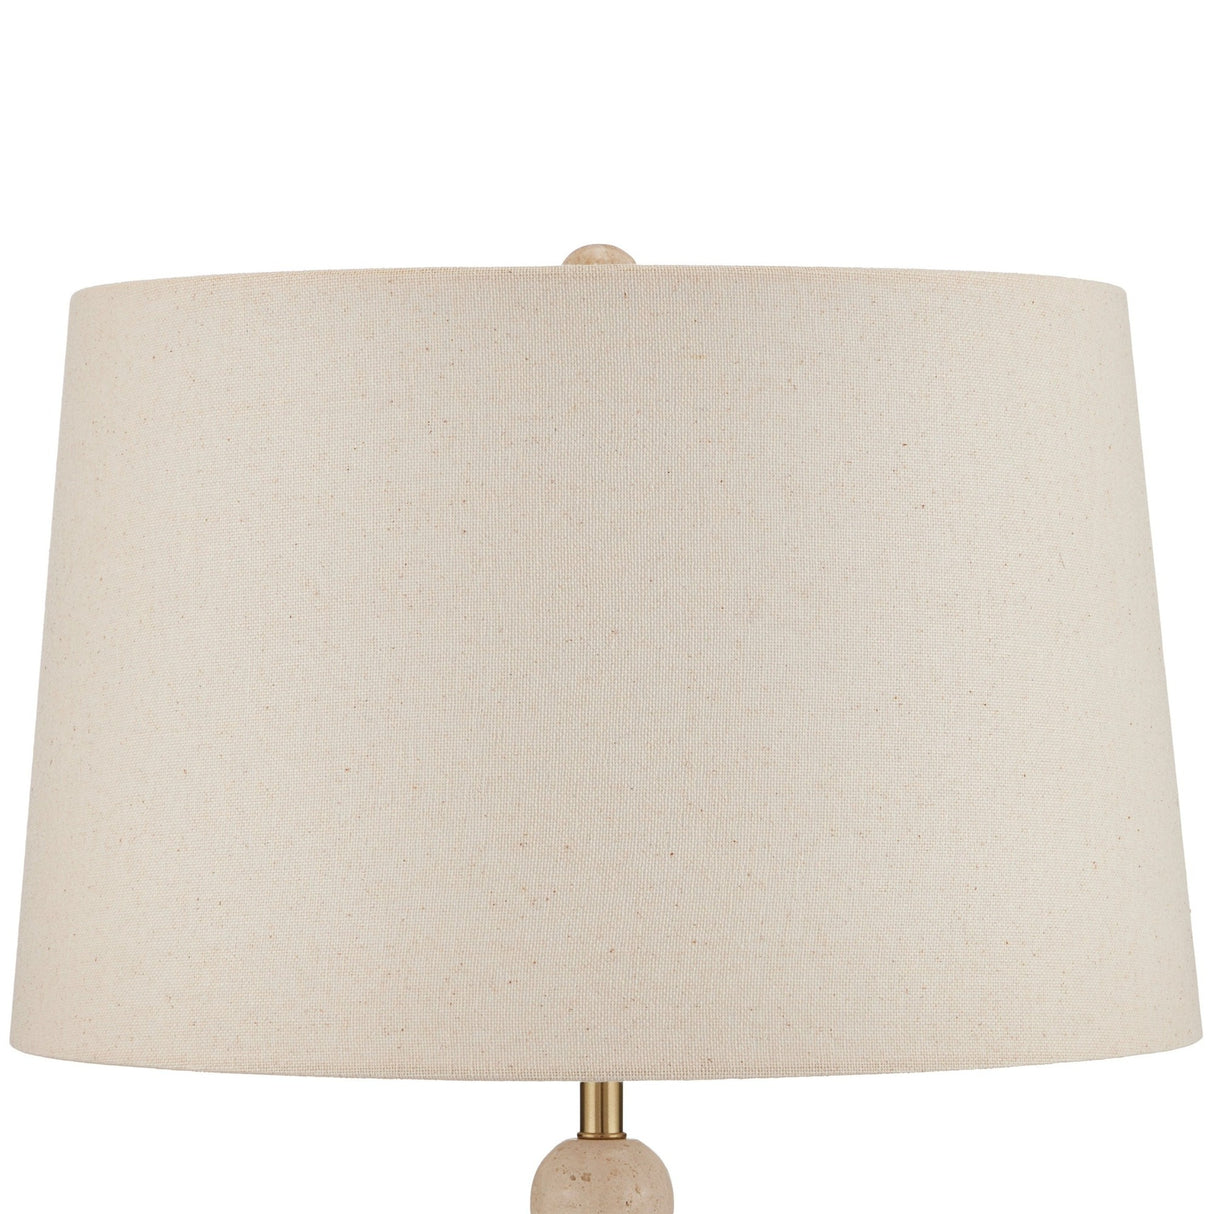 Currey & Company Niobe Table Lamp Table Lamps currey-co-6000-0915